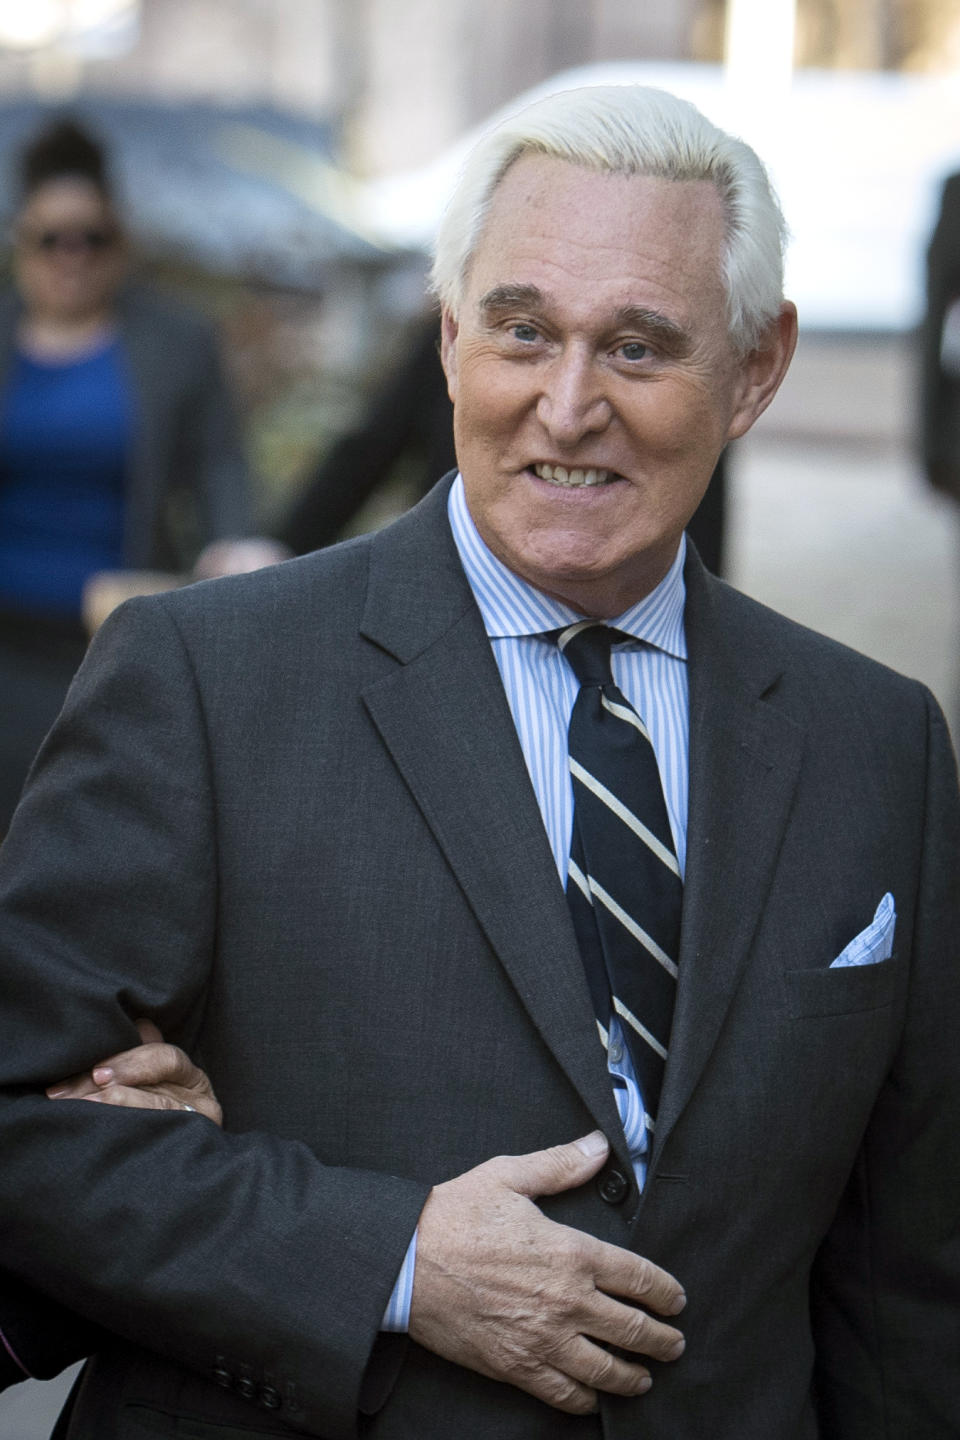 Roger Stone arrives at Federal Court for the second day of jury selection for his federal trial, in Washington, Wednesday, Nov. 6, 2019. (AP Photo/Cliff Owen)